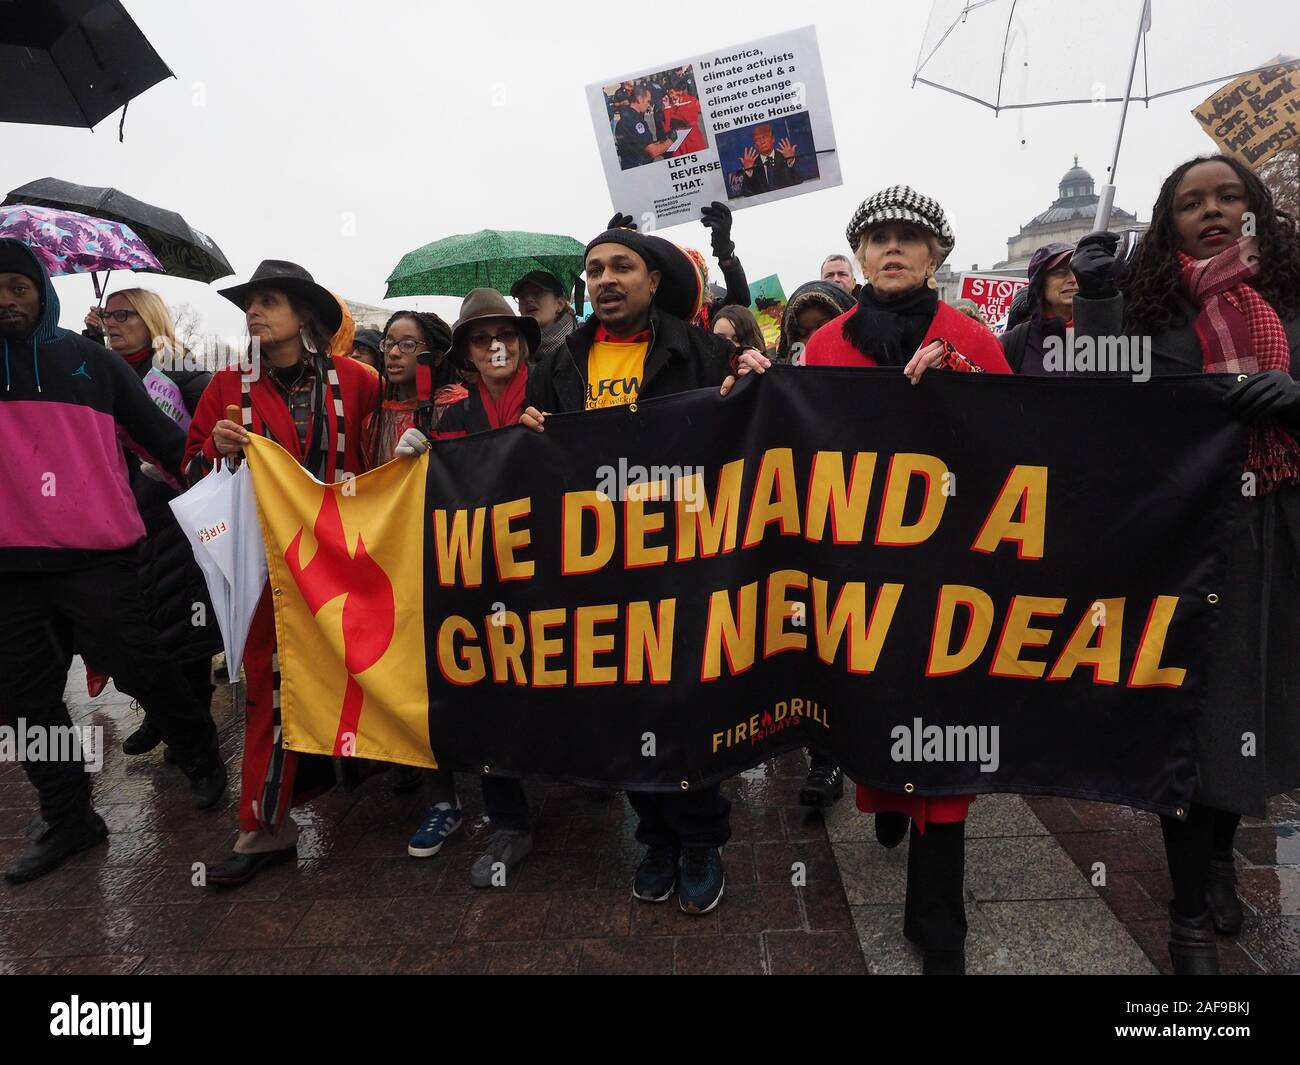 Washington, District of Columbia, USA. 13th Dec, 2019. Sally Fields and Jane Fonda marched to the steps of the US Capitol during the Fire Drill Friday rally, with the demand for a Green New Deal.The event focused on the need for a 'Just Transition' from our fossil fuel-based economy to one based on clean, renewable energy sources. Credit: Sue Dorfman/ZUMA Wire/Alamy Live News Stock Photo